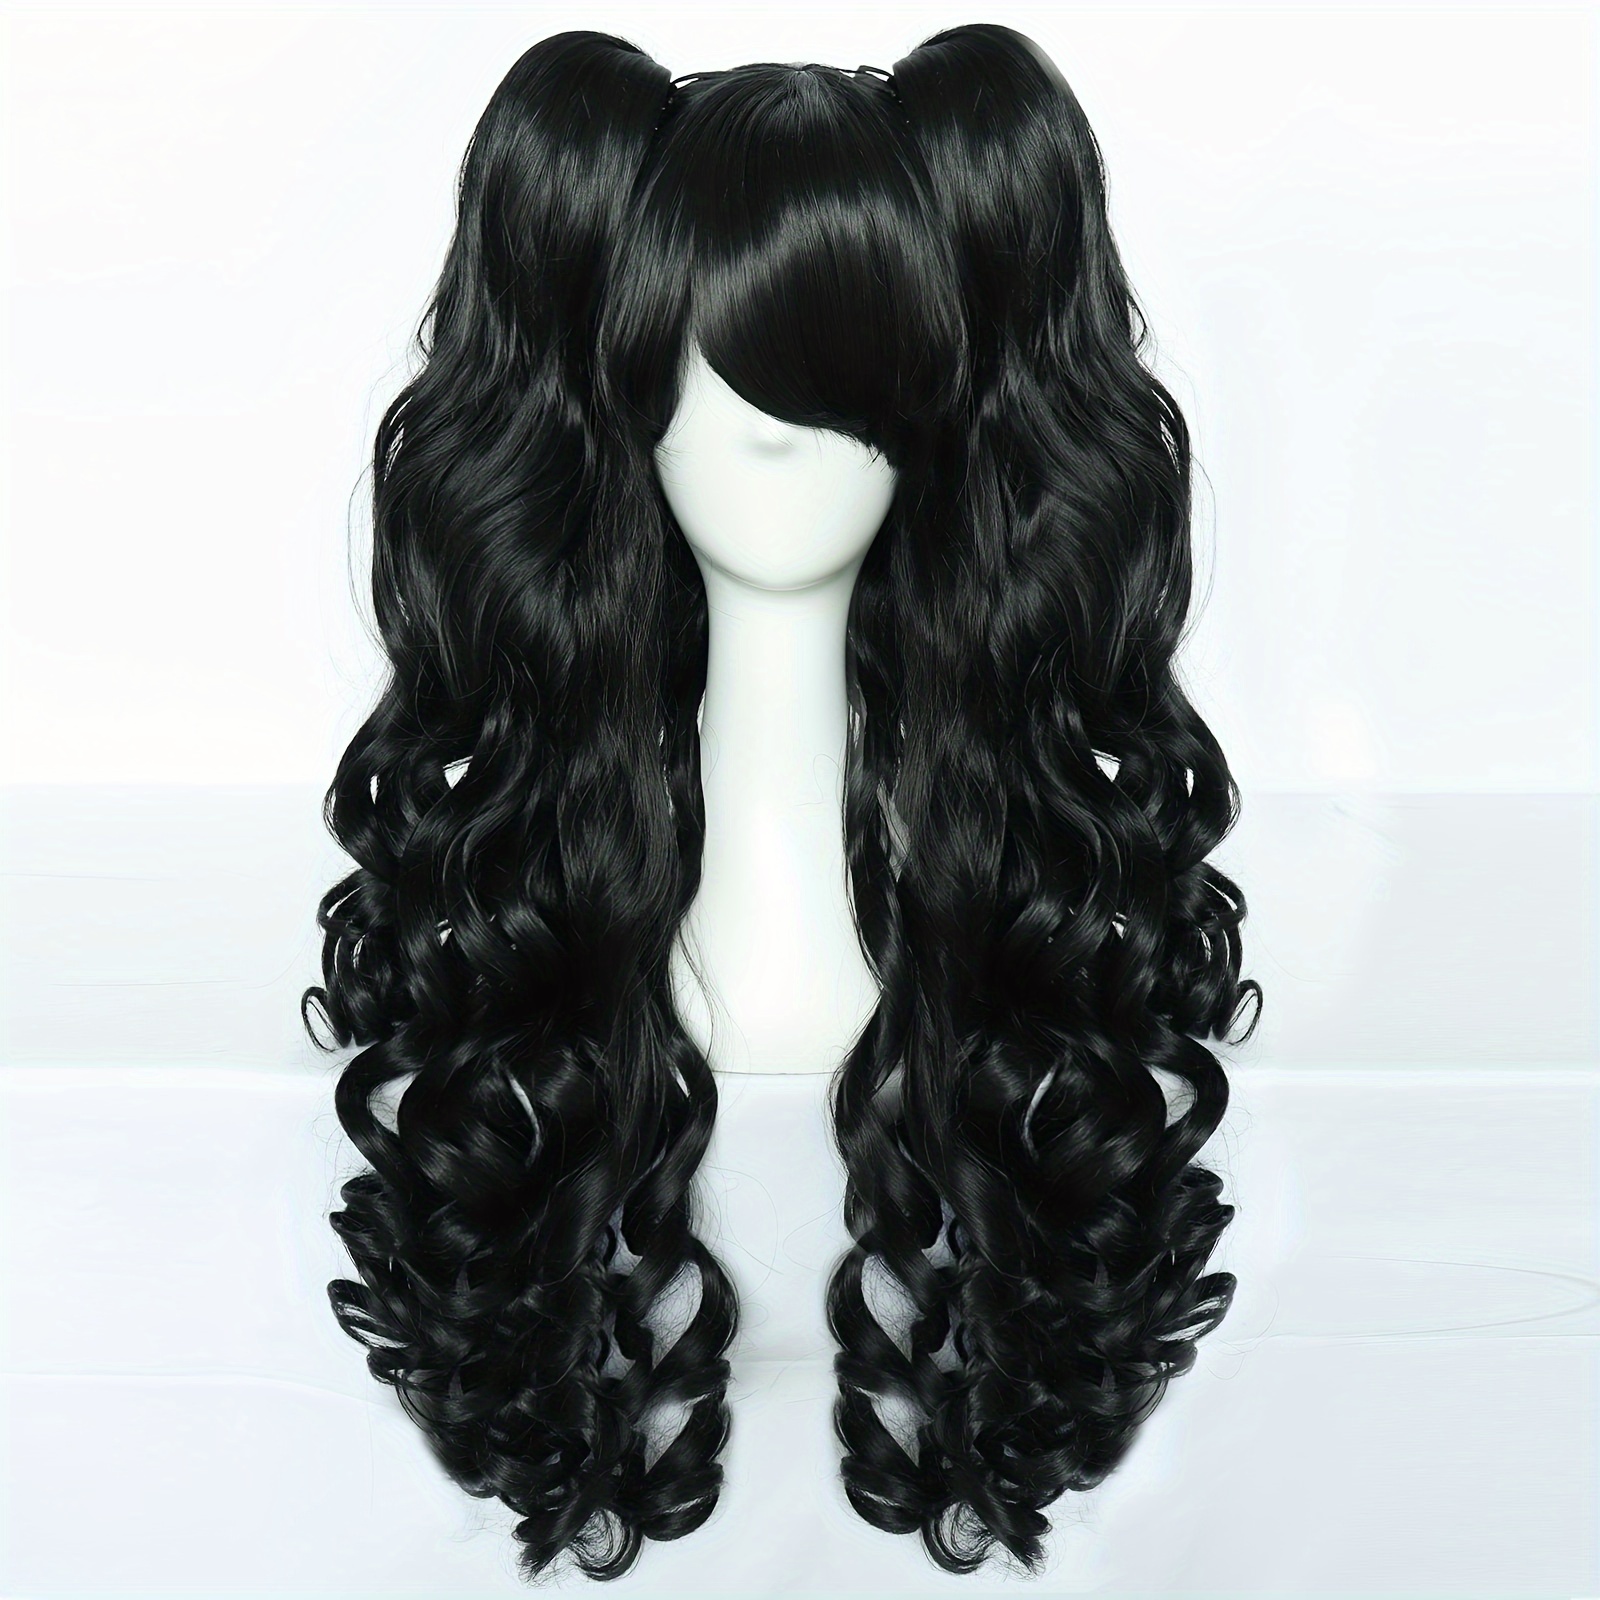 

Black Long Curly Wigs With 2 Curly Ponytails 22inch Long Synthetic Wavy Wigs With Bangs For Cosplay Costume For Halloween Party Christmas School & 1pc Wig Cap